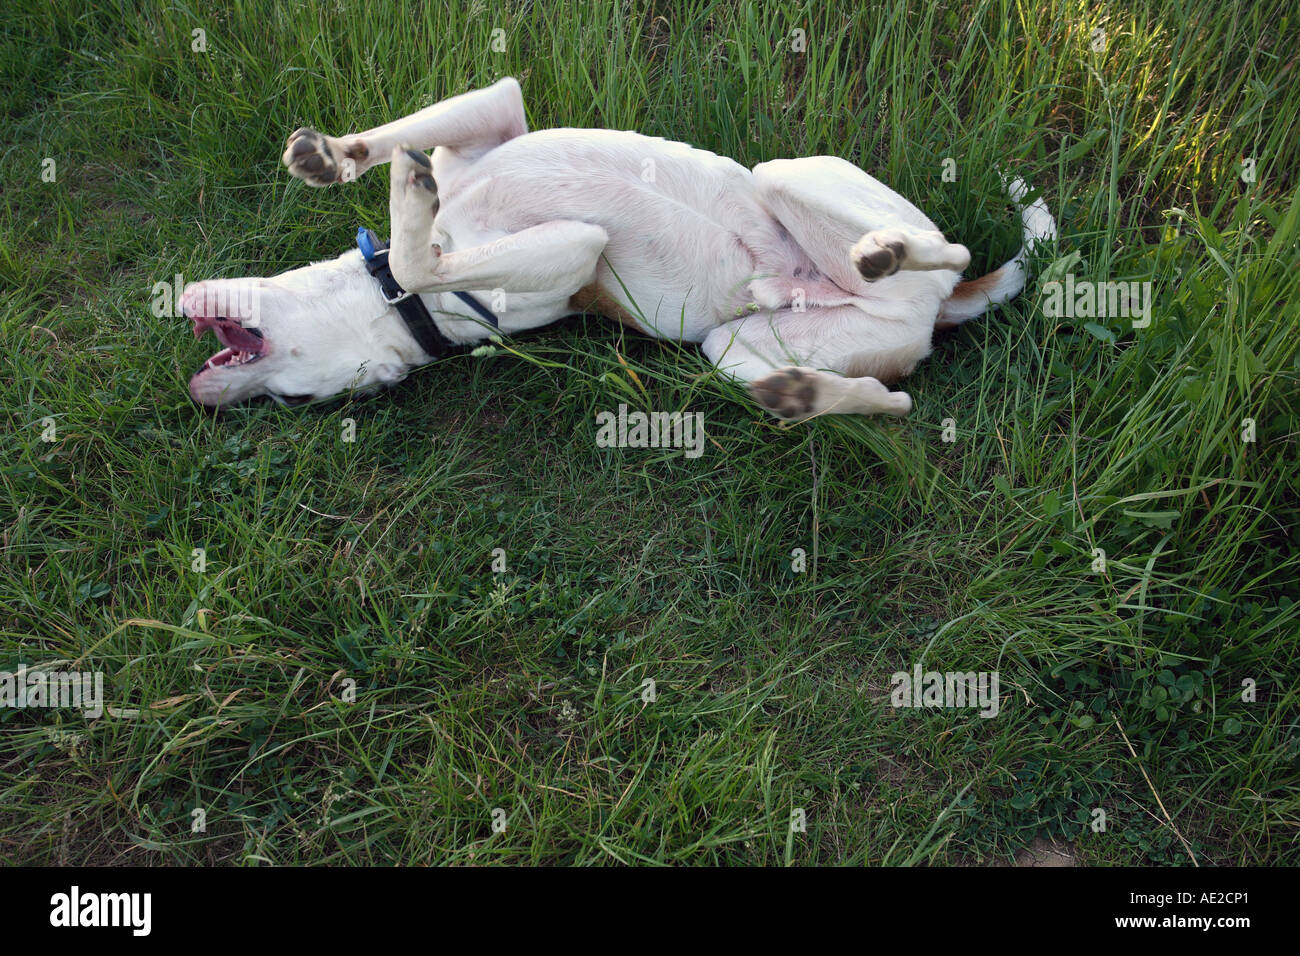 Cross breed farm dog rolling in the grass. Stock Photo